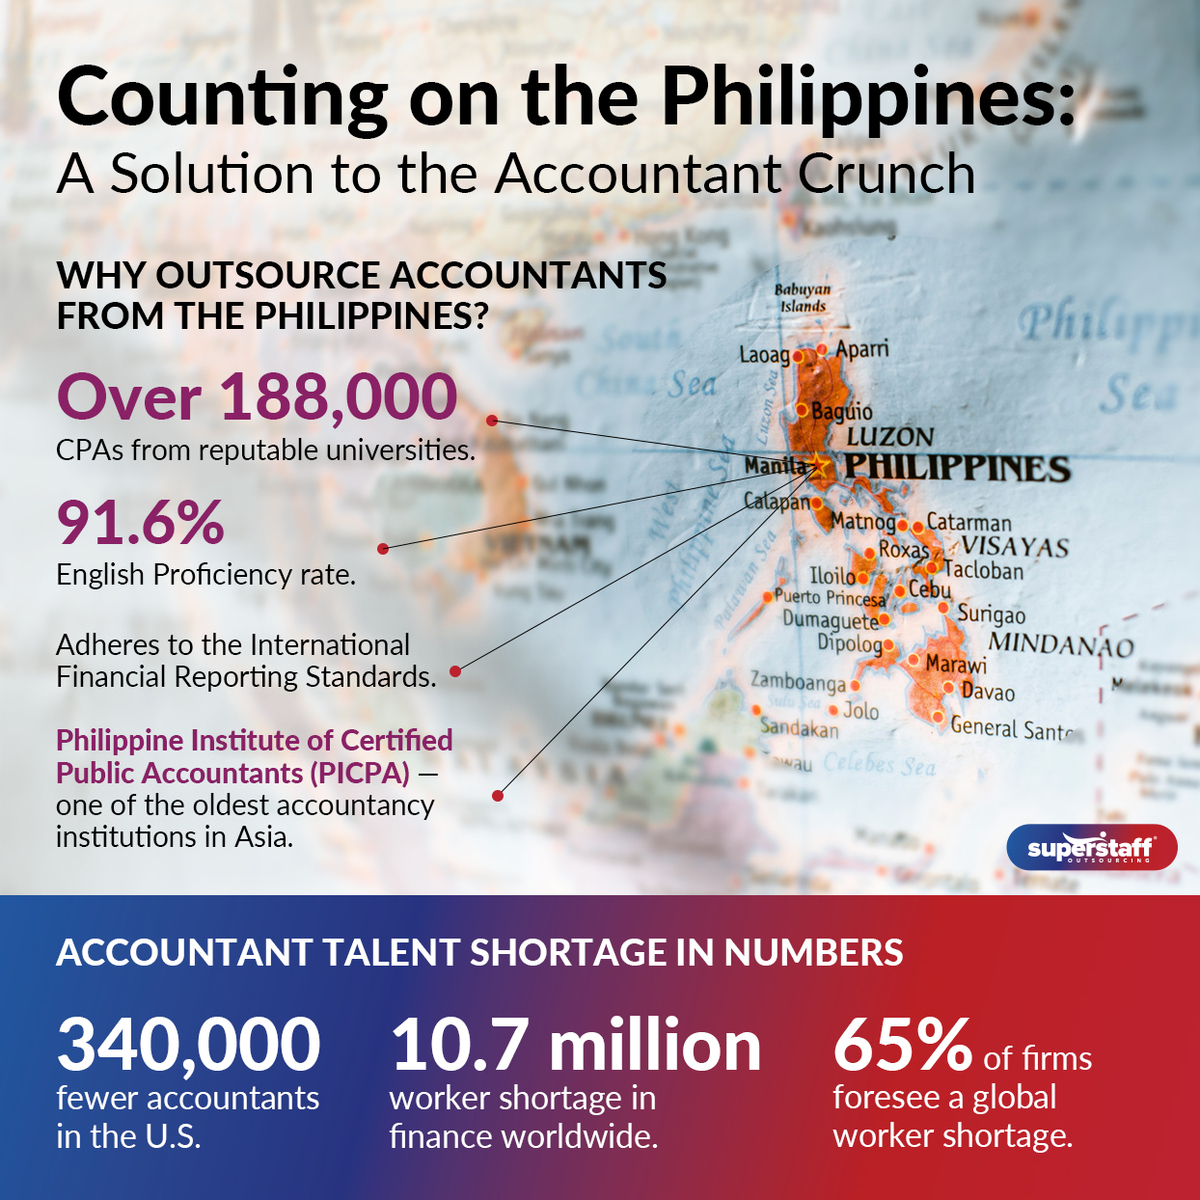 A mini infographic shows a map of the Philippines. Image caption reads: Counting on the Philippines for Financial Services Talent.